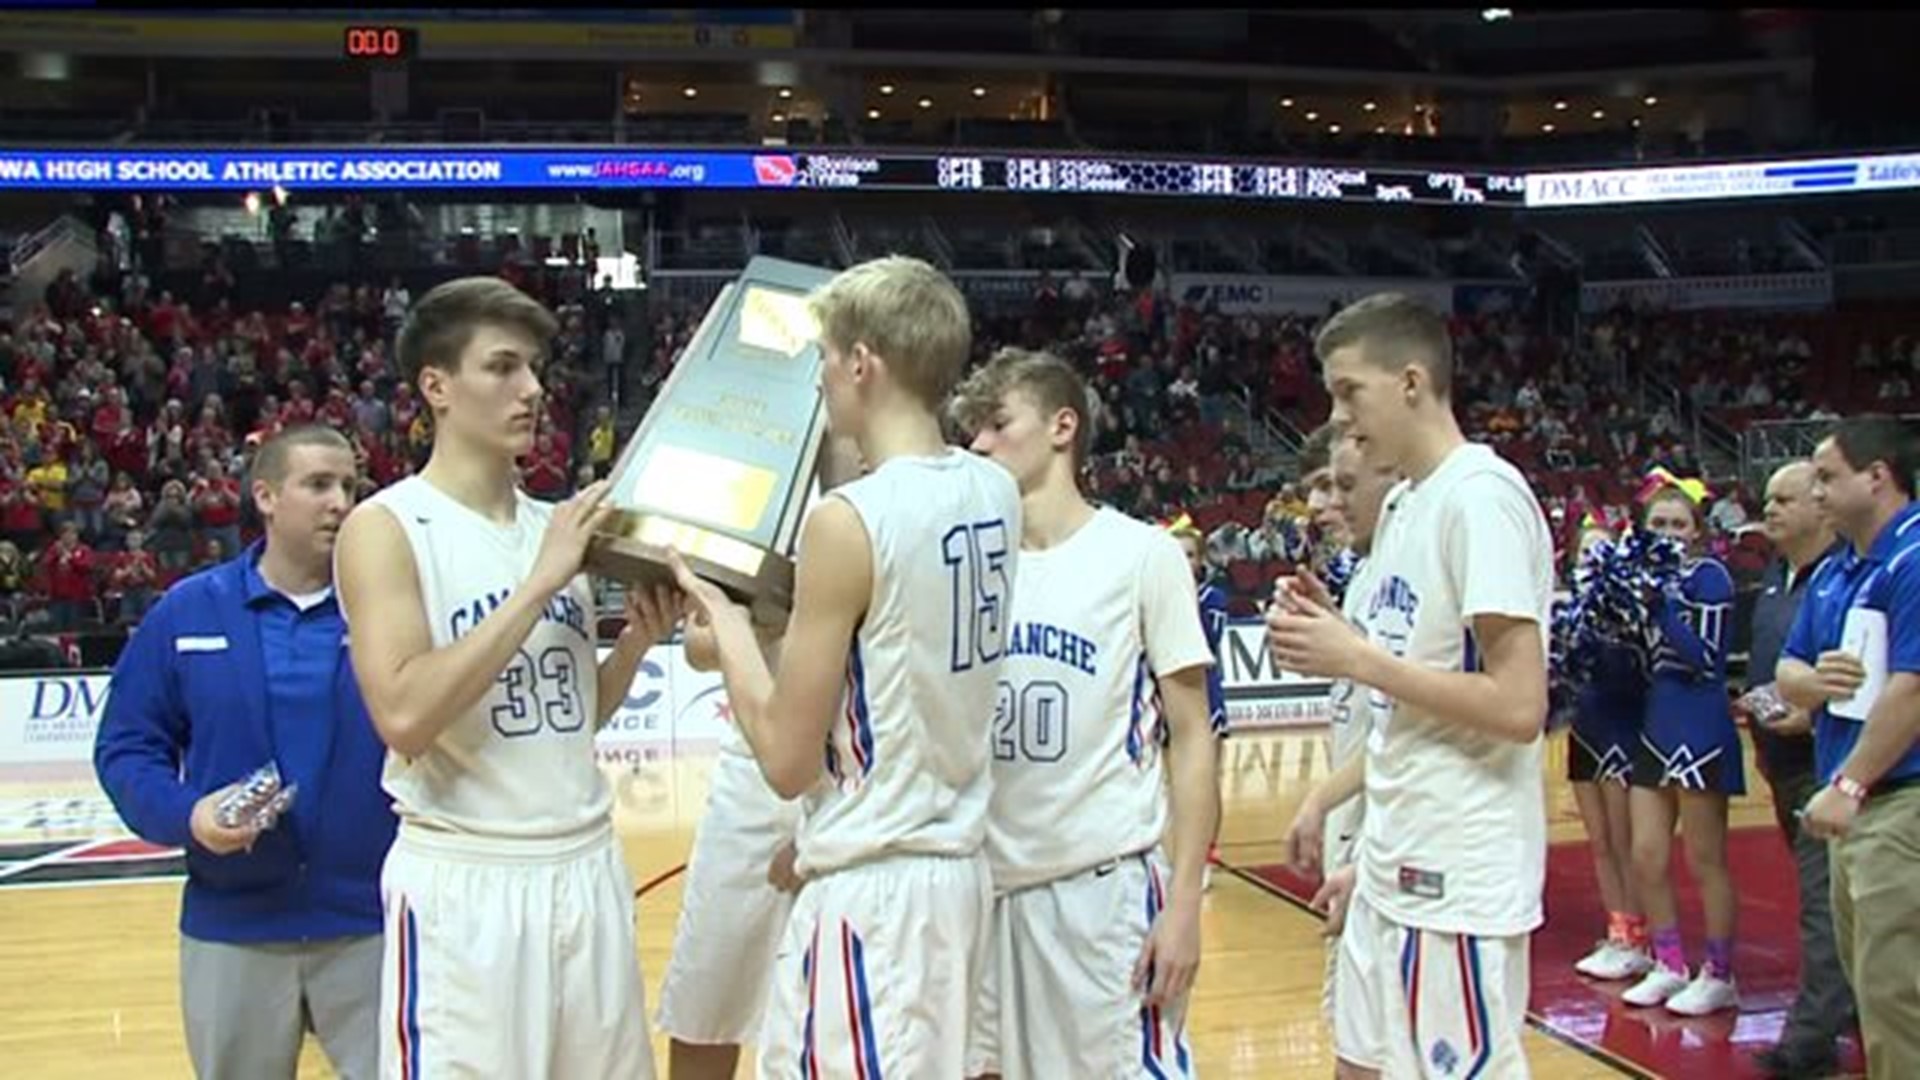 Camanche claims 4th